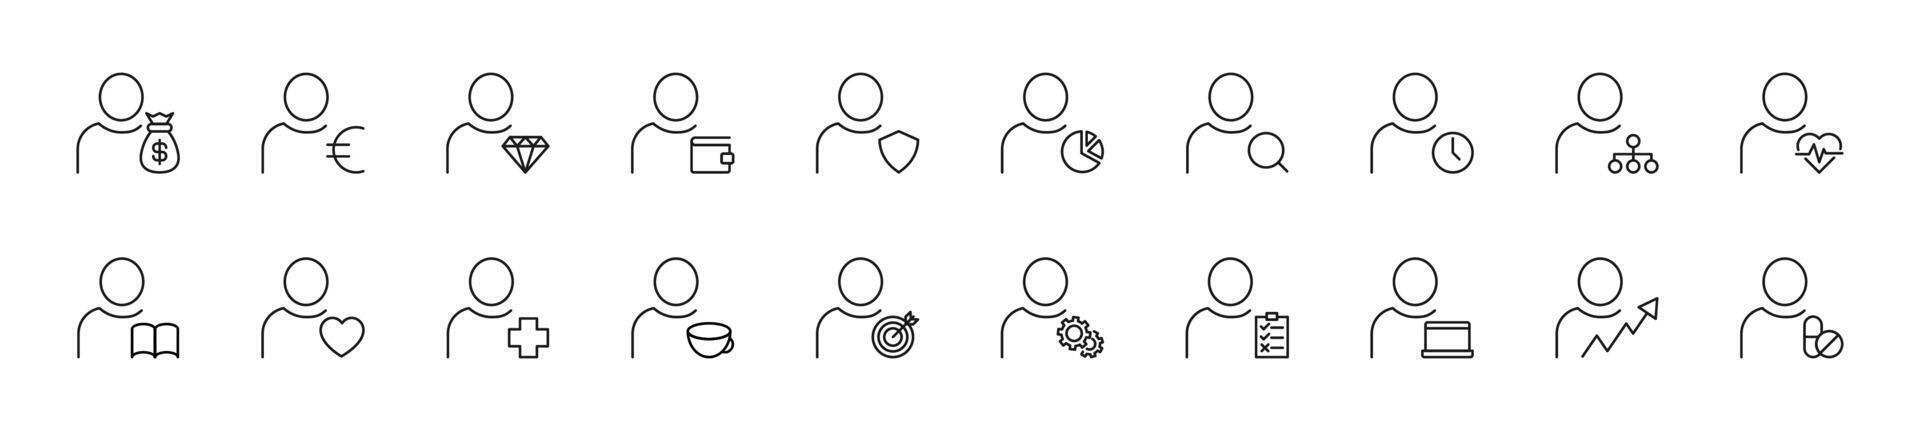 Collection of thin line icons of items by faceless user. Linear sign and editable stroke. Suitable for web sites, books, articles vector